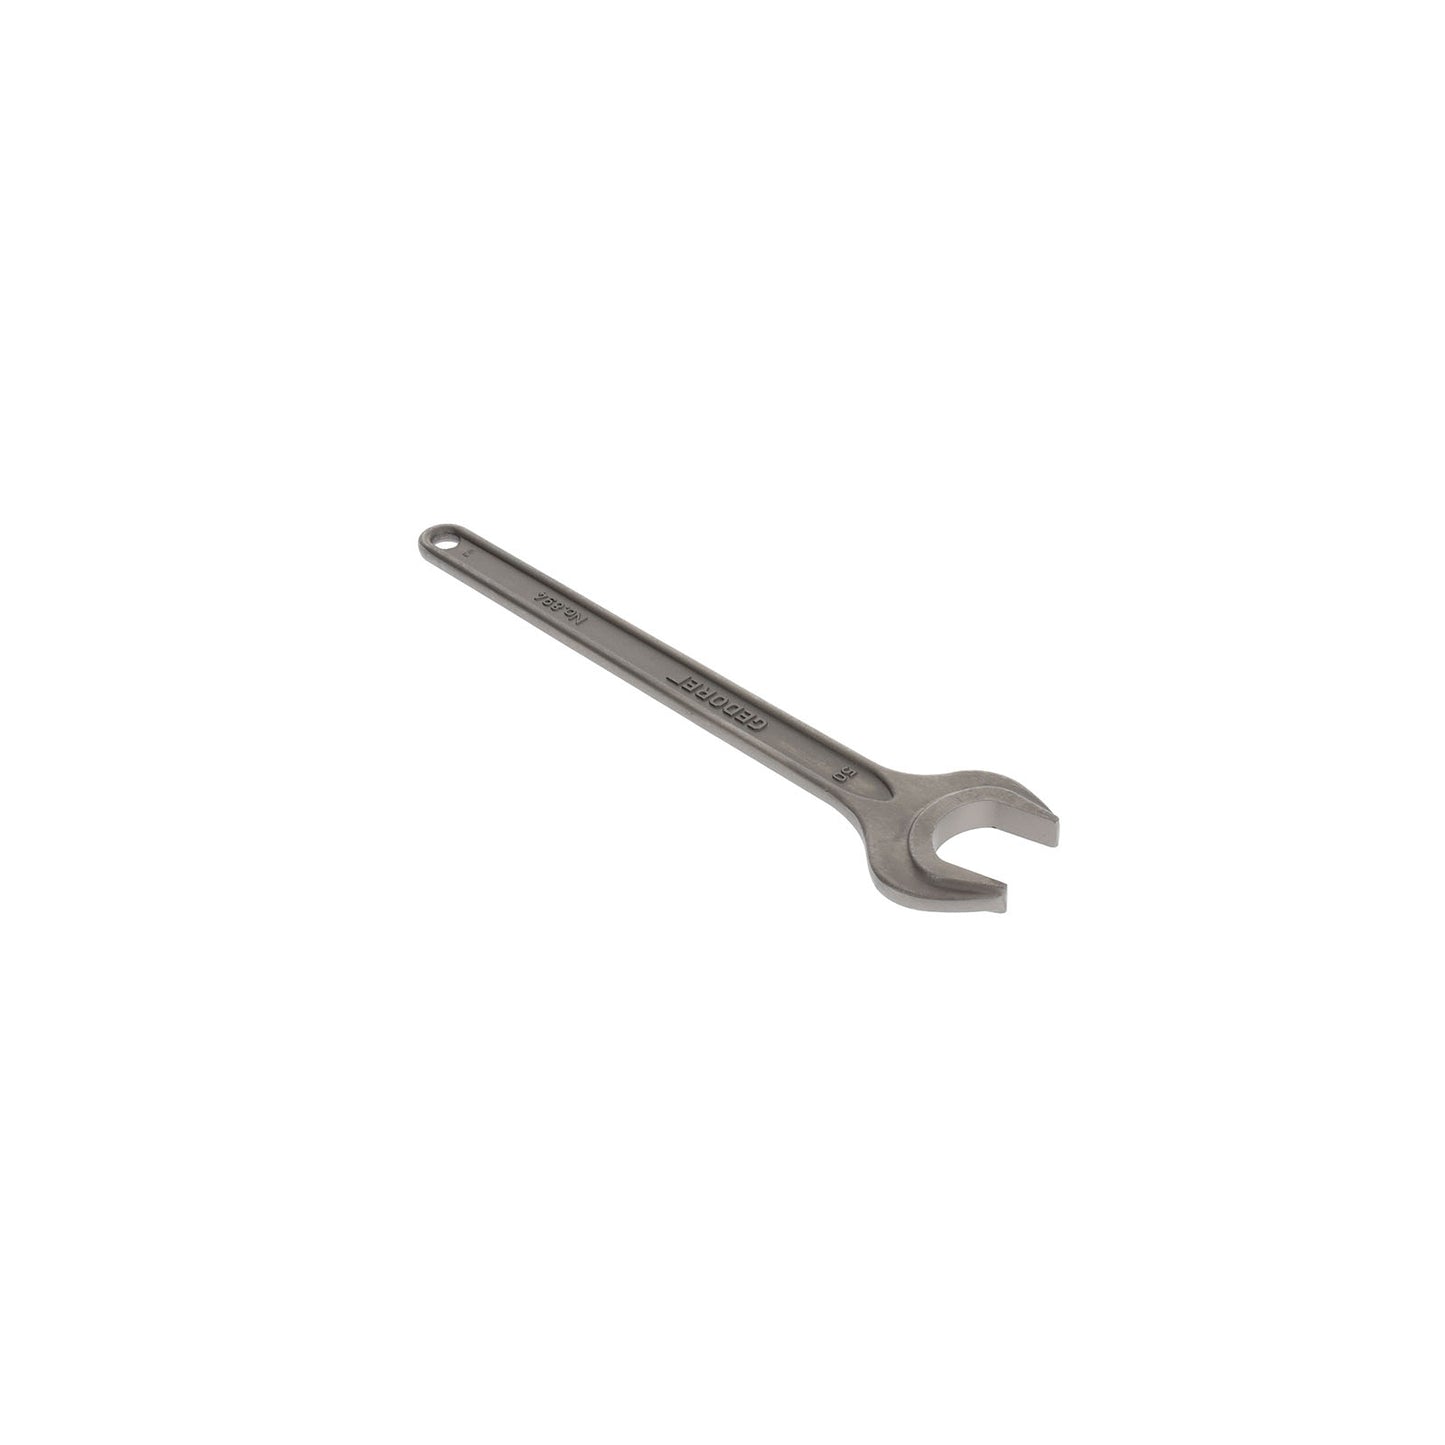 GEDORE 894 50 - 1 Open End Wrench, 50mm (6577190)